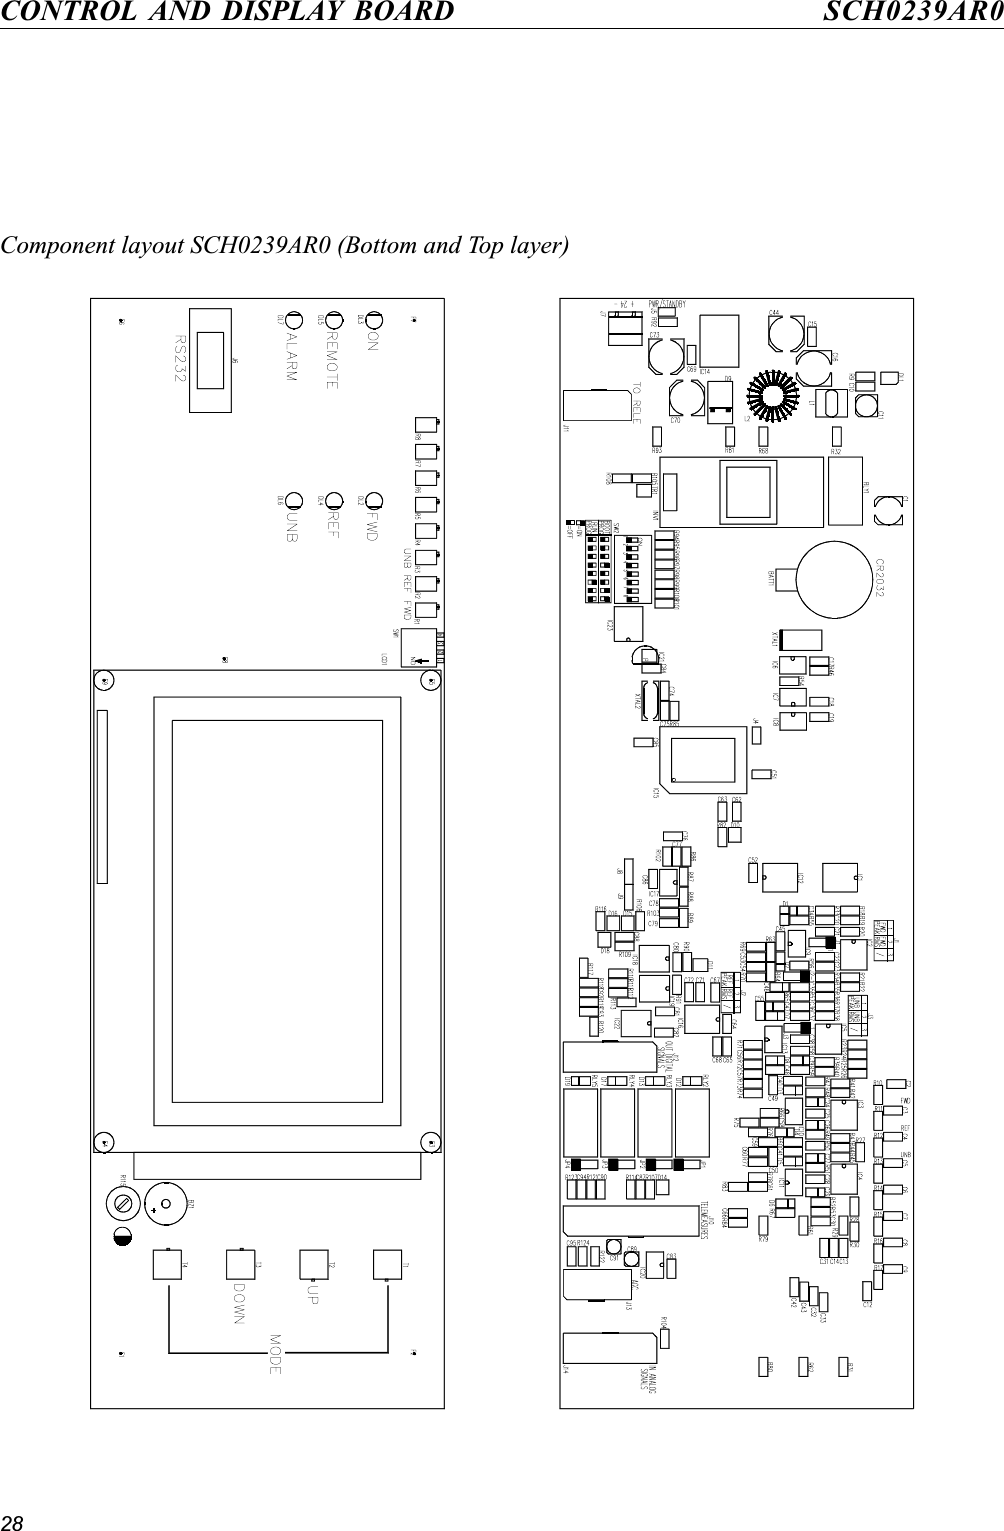 28CONTROL AND DISPLAY BOARD SCH0239AR0Component layout SCH0239AR0 (Bottom and Top layer)